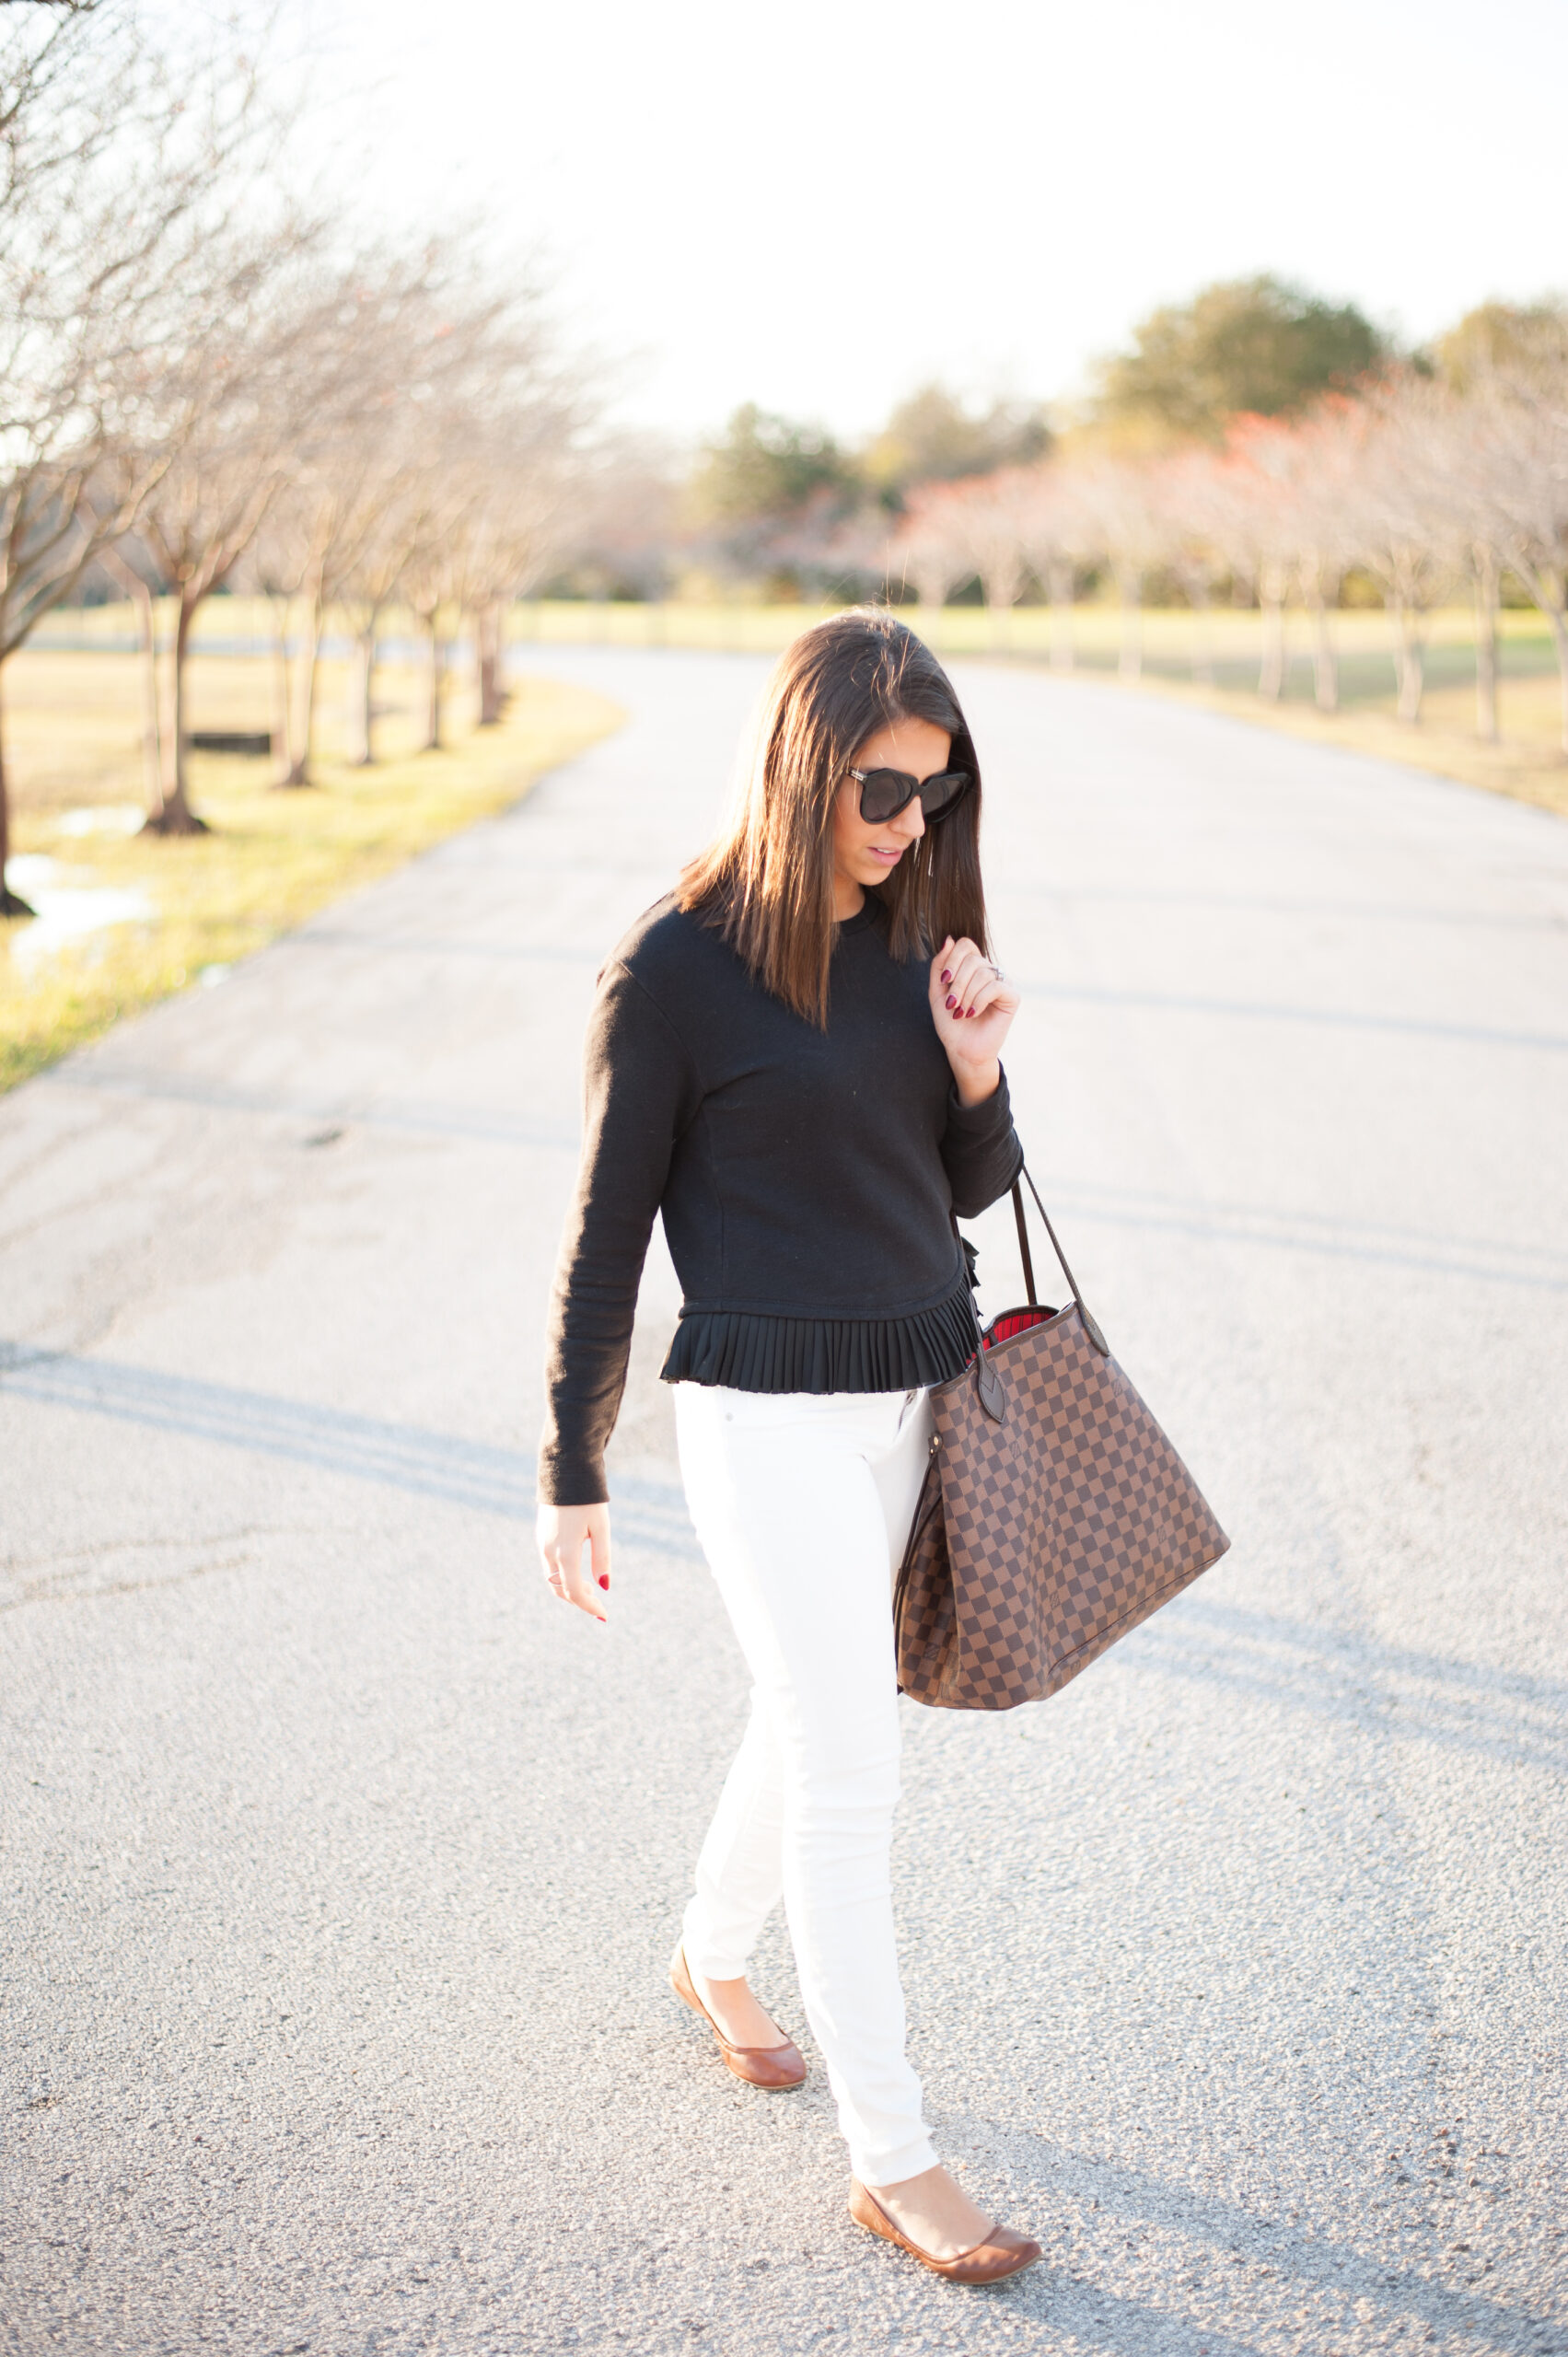 dress_up_buttercup_dede_raad_fashion_blogger_houston (6 of 8)